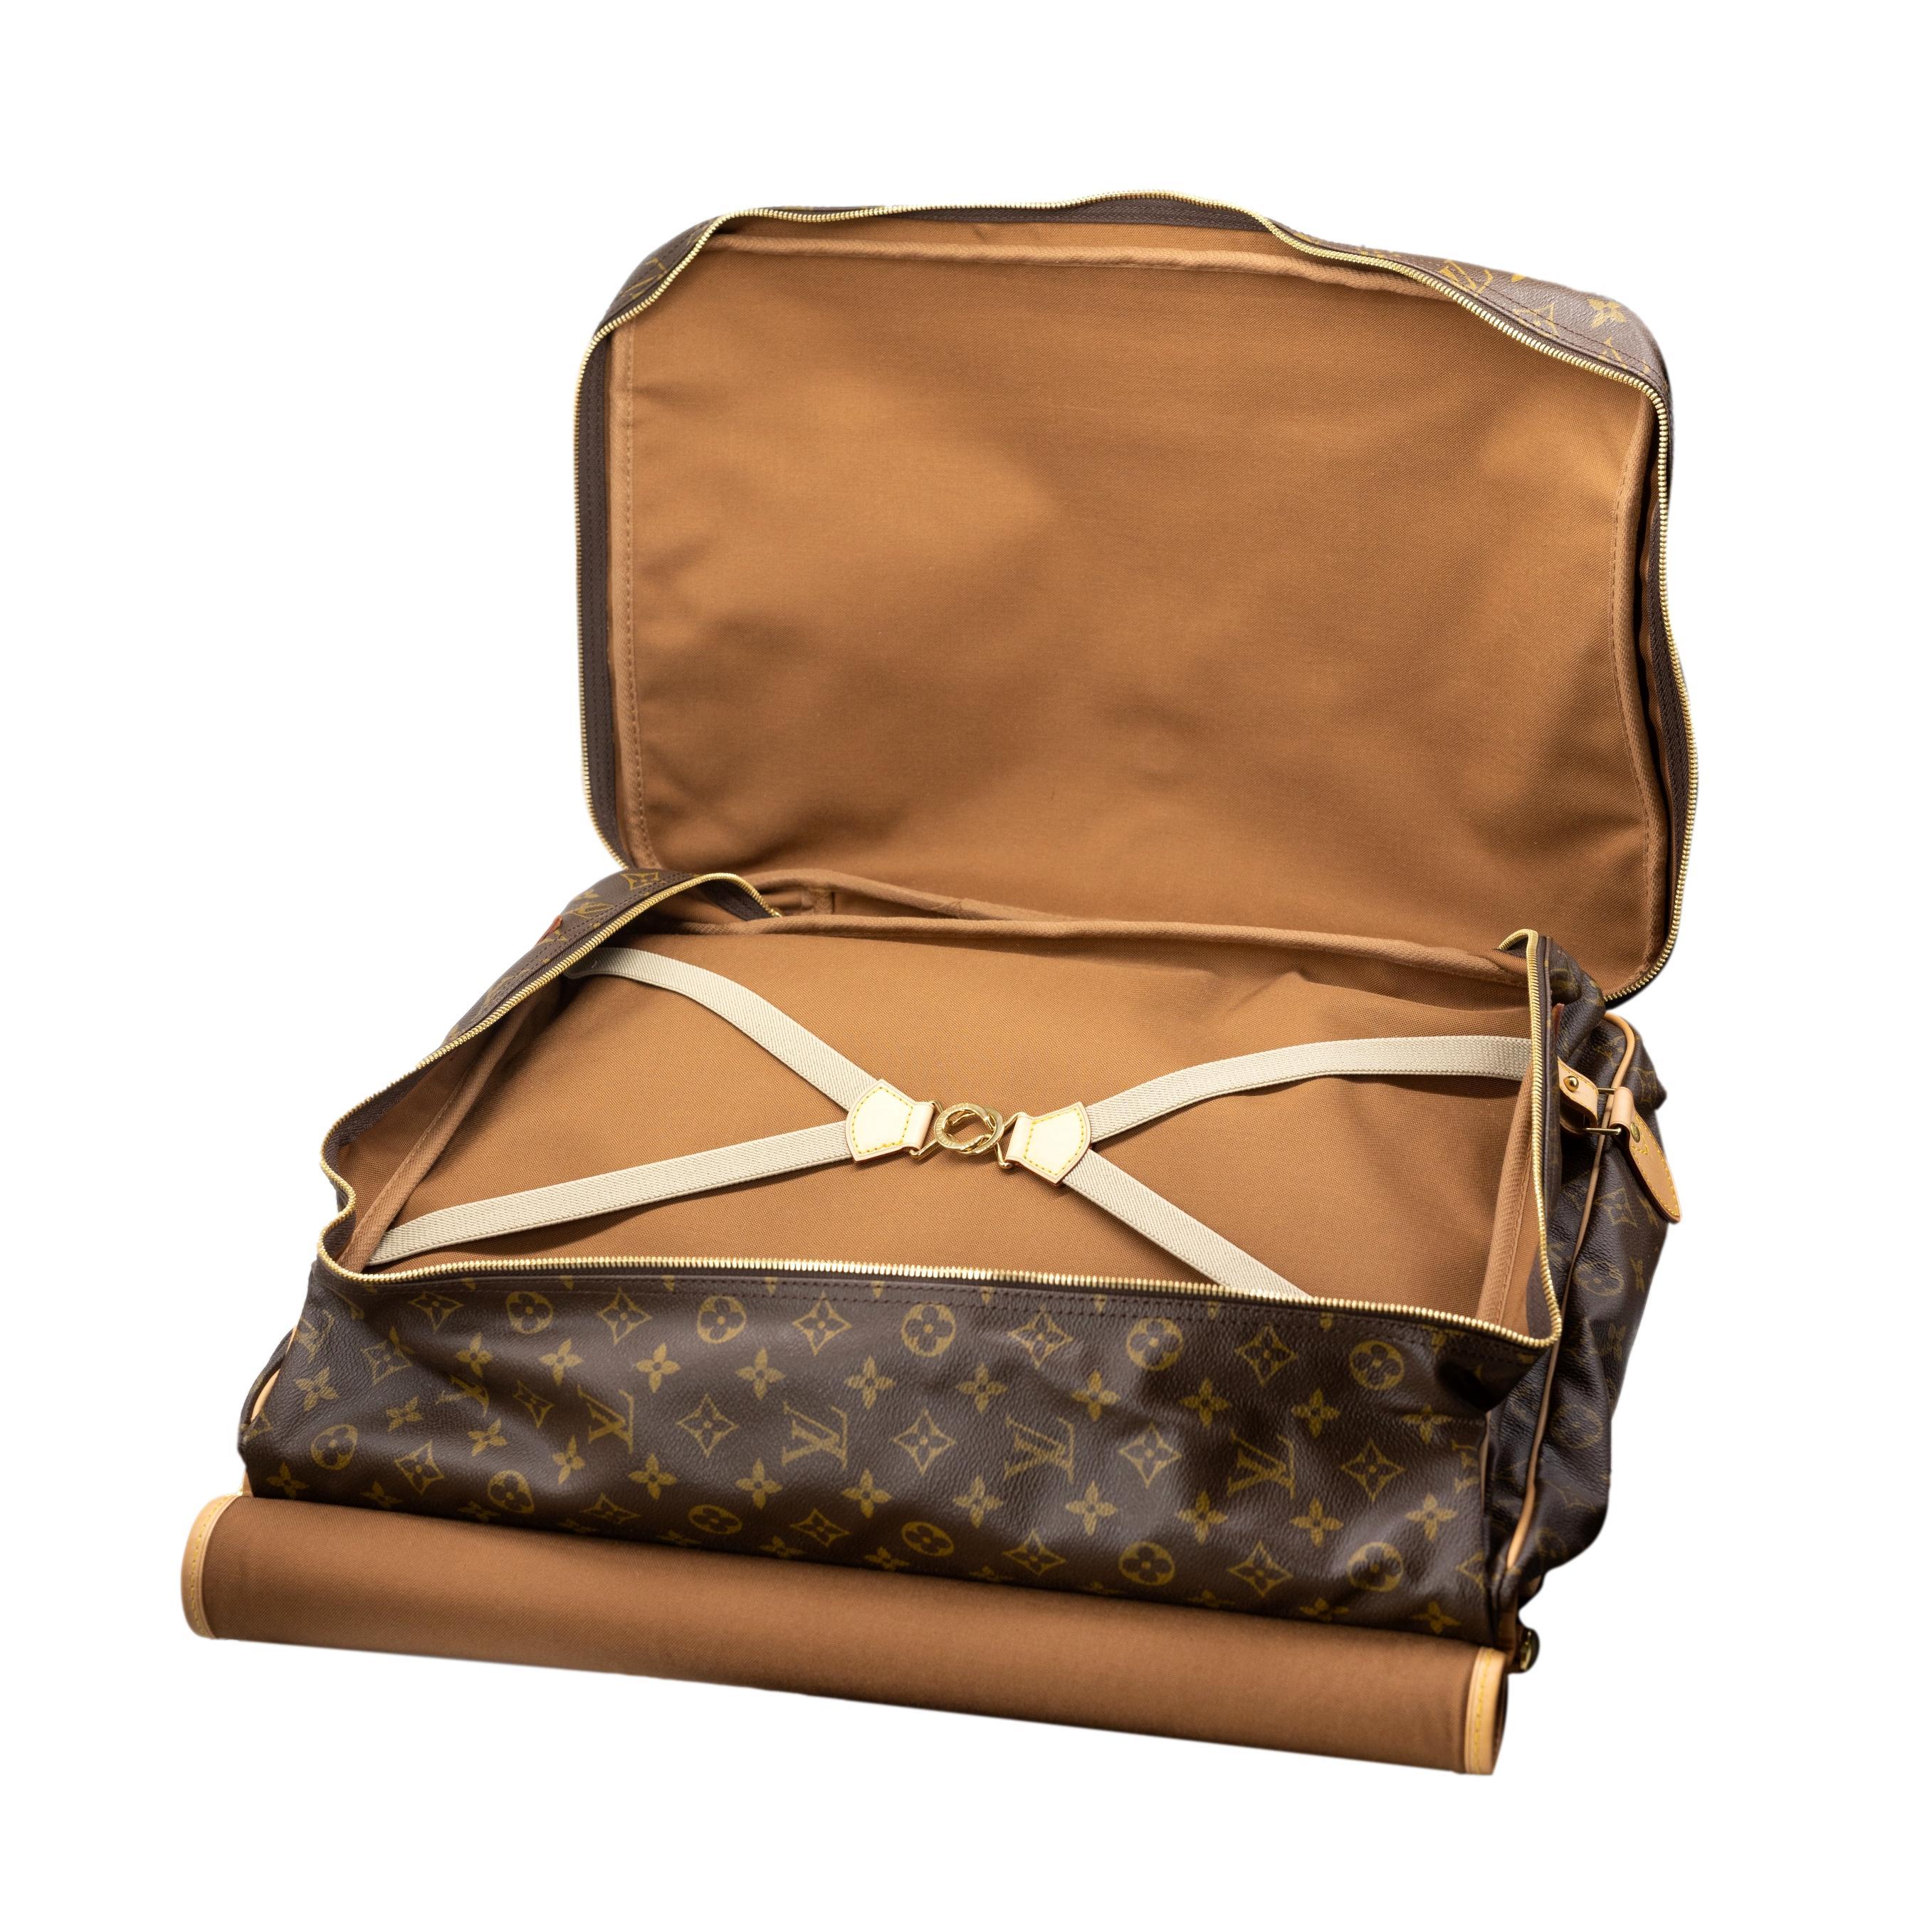 Louis Vuitton Monogram Canvas Sac Chasse Hunting Bag, France 2010. This iconic sac chasse hunting bag, a version of Louis Vuittons luggage collection which was first introduced in the 1930's by Gaston Vuitton as the city alternative to the original